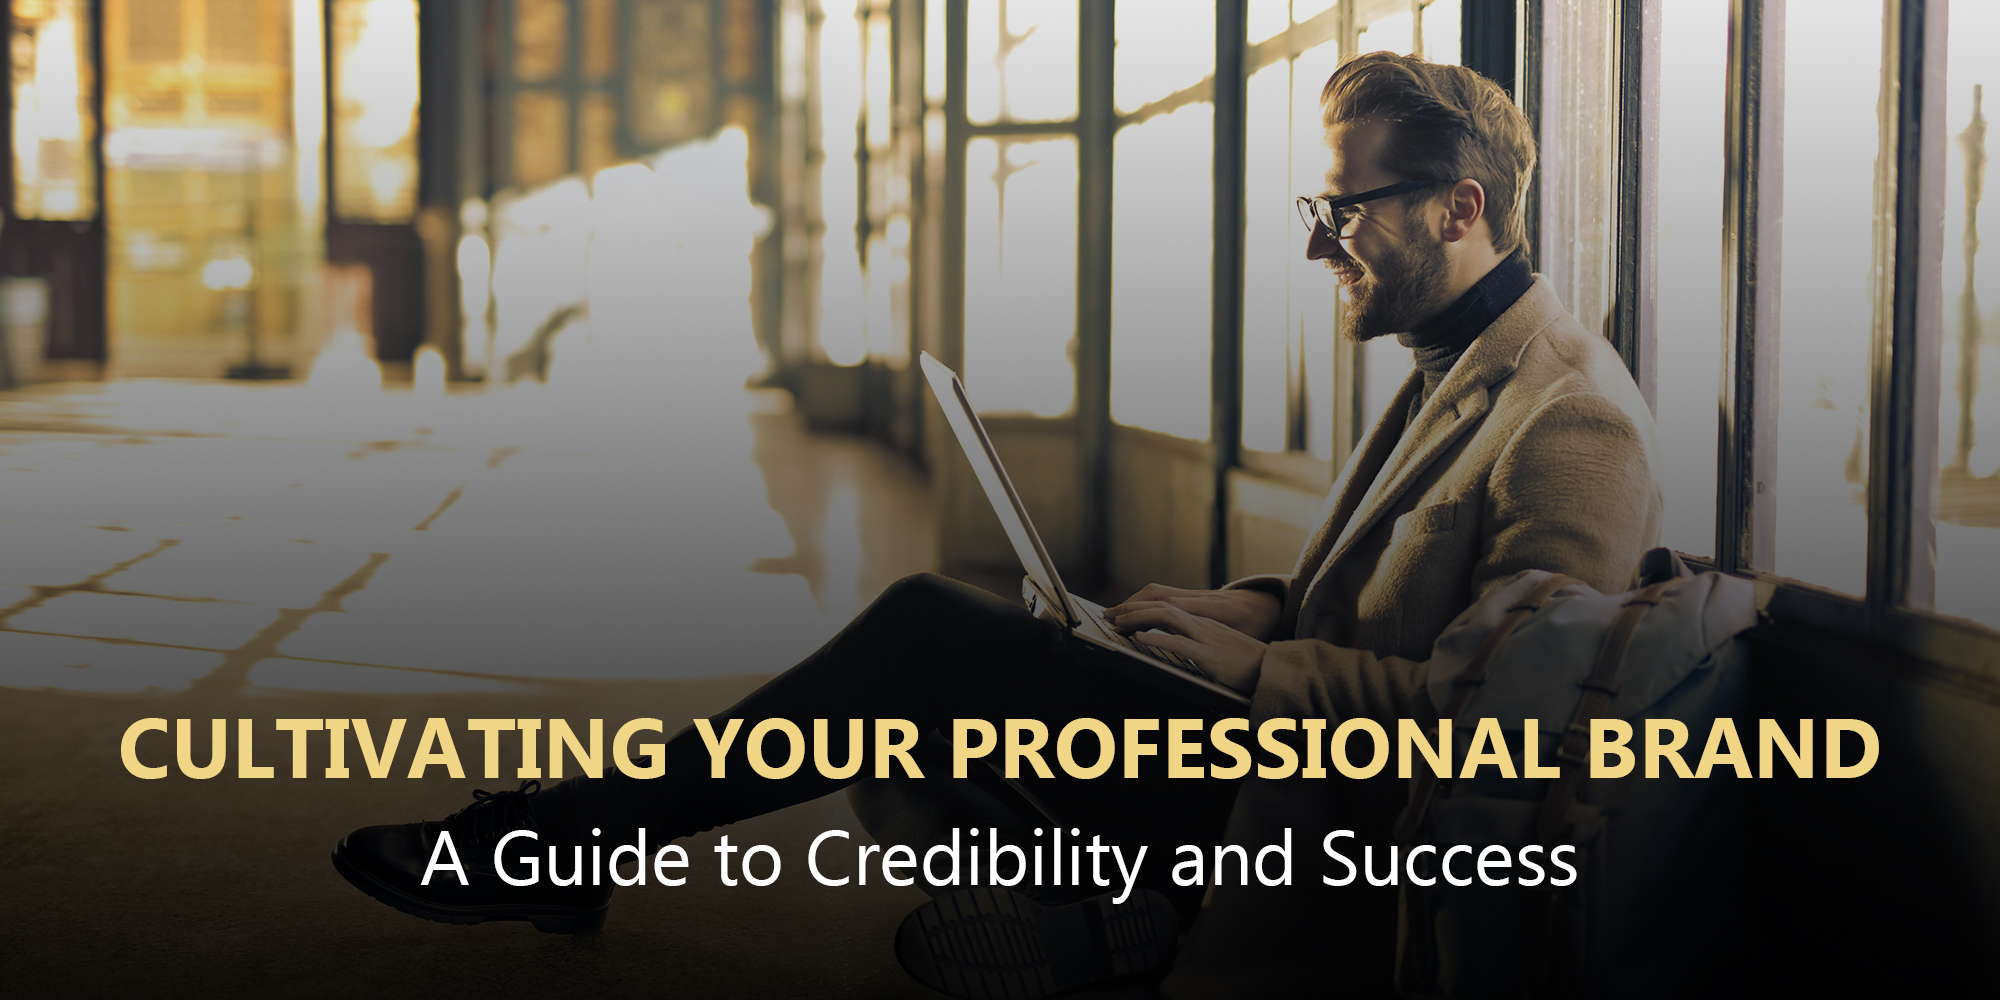 Cultivating Your Professional Brand: A Guide to Credibility and Success